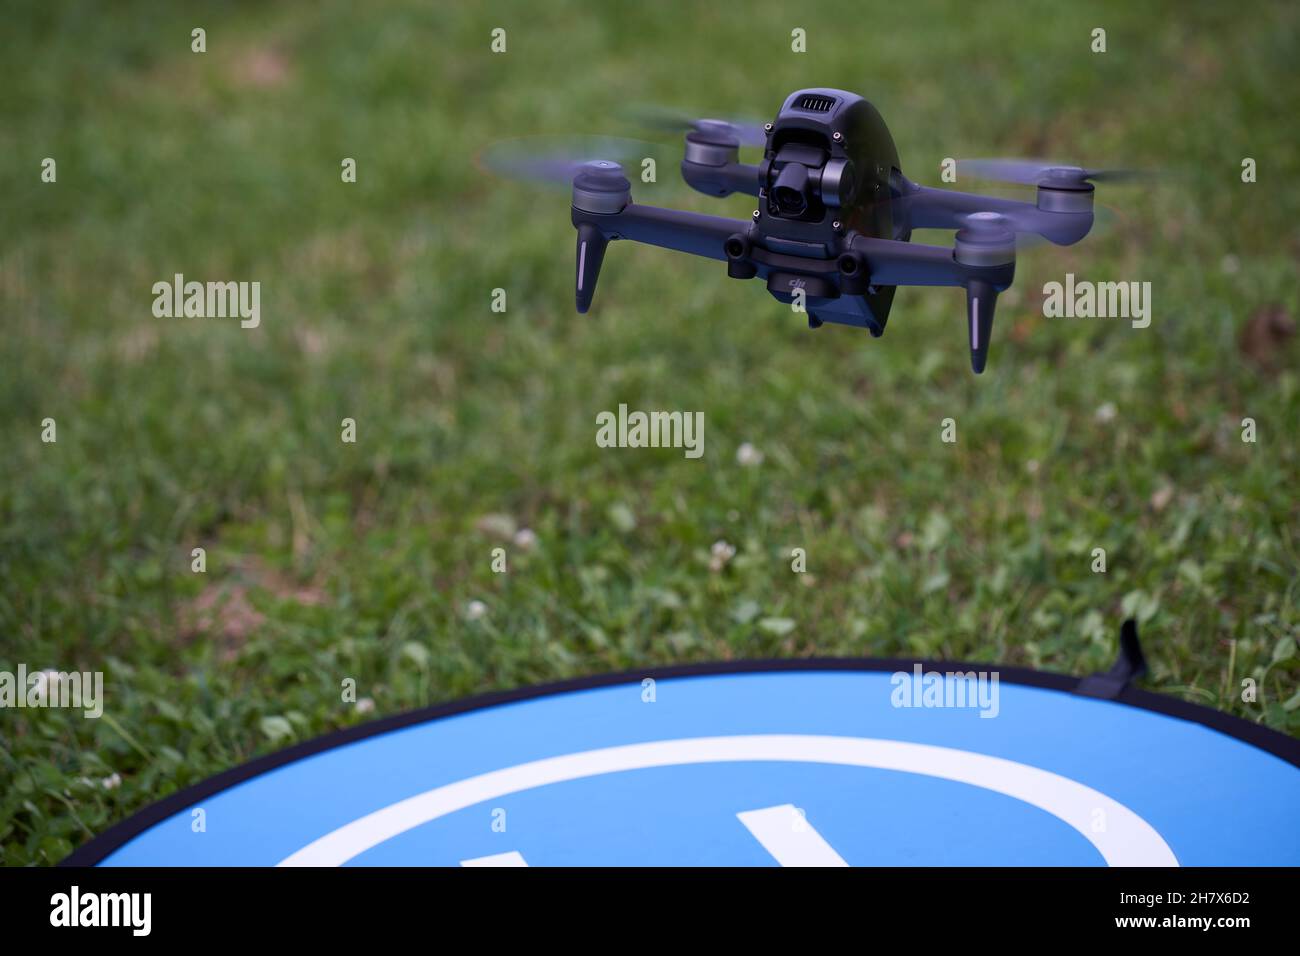 Nürtingen, Germany - June 26, 2021: Black fpv drone from the dji company are ready for landing. Uas with 4 dark propellers. Blue landing pad and green Stock Photo